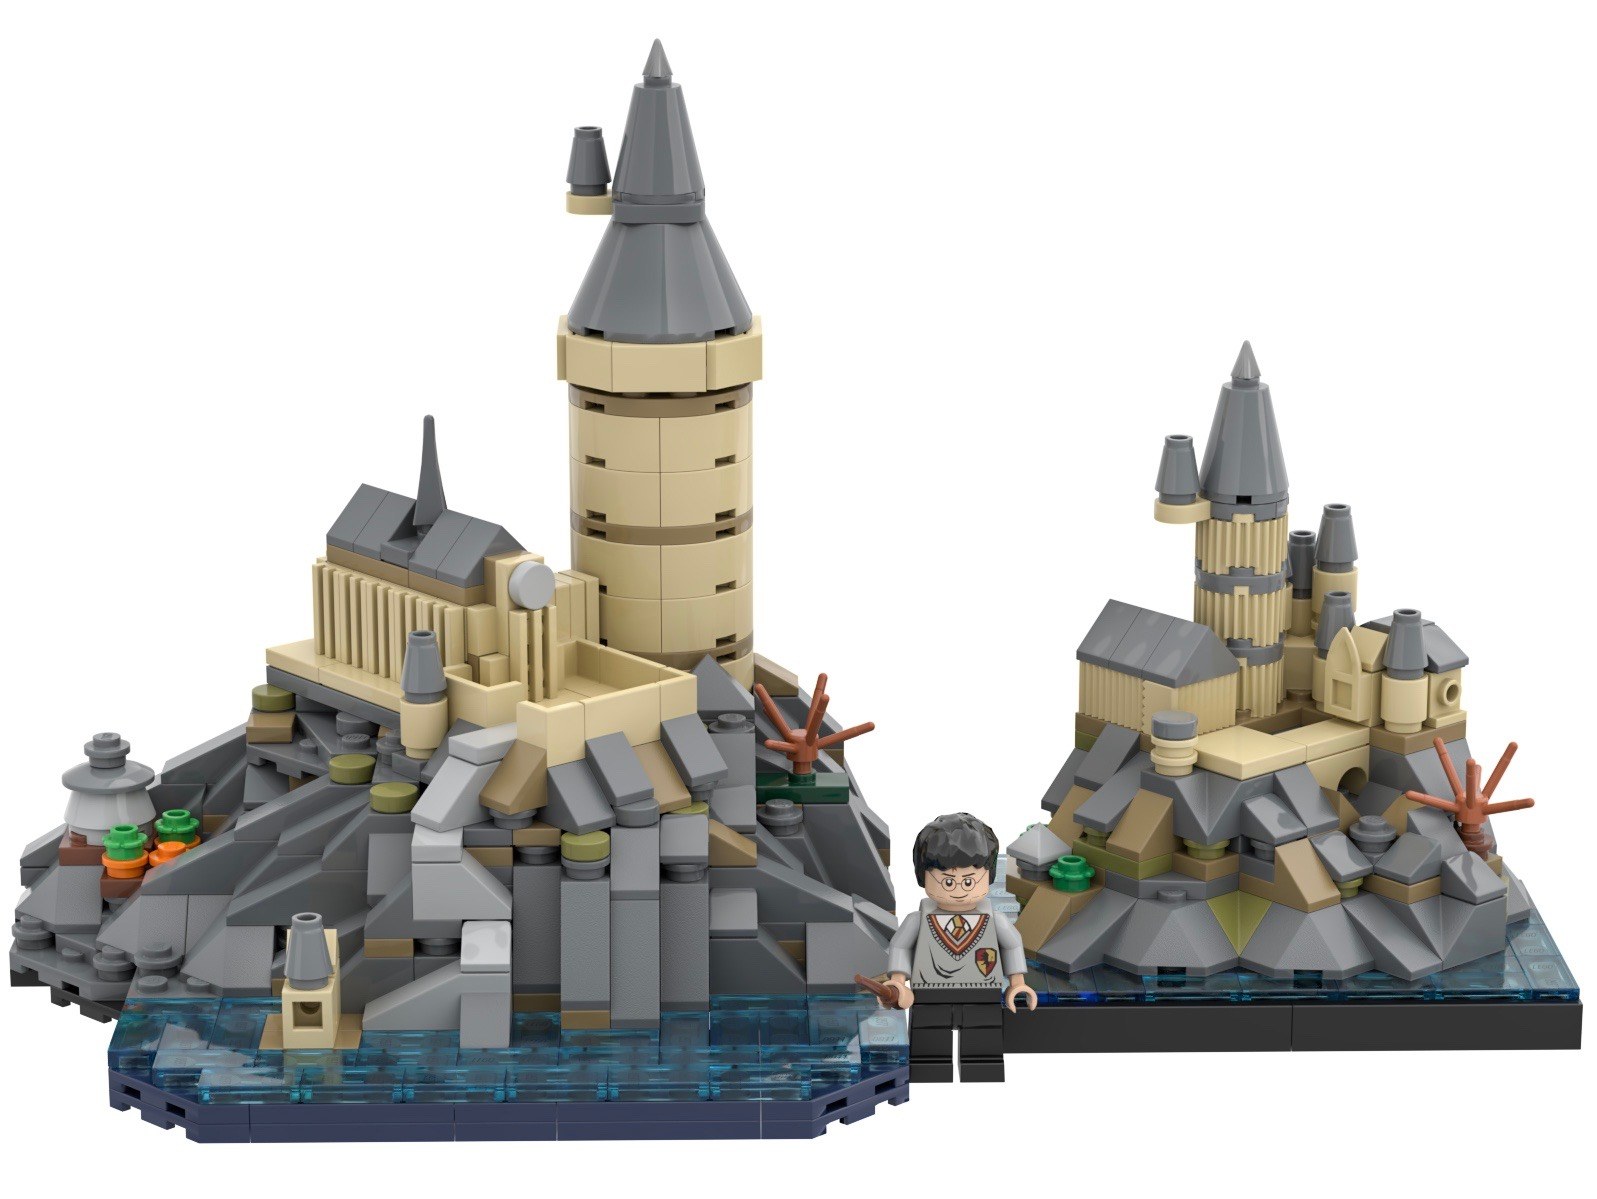 Epic Build In A Micro Scale - BrickNerd - All things LEGO and the LEGO fan  community